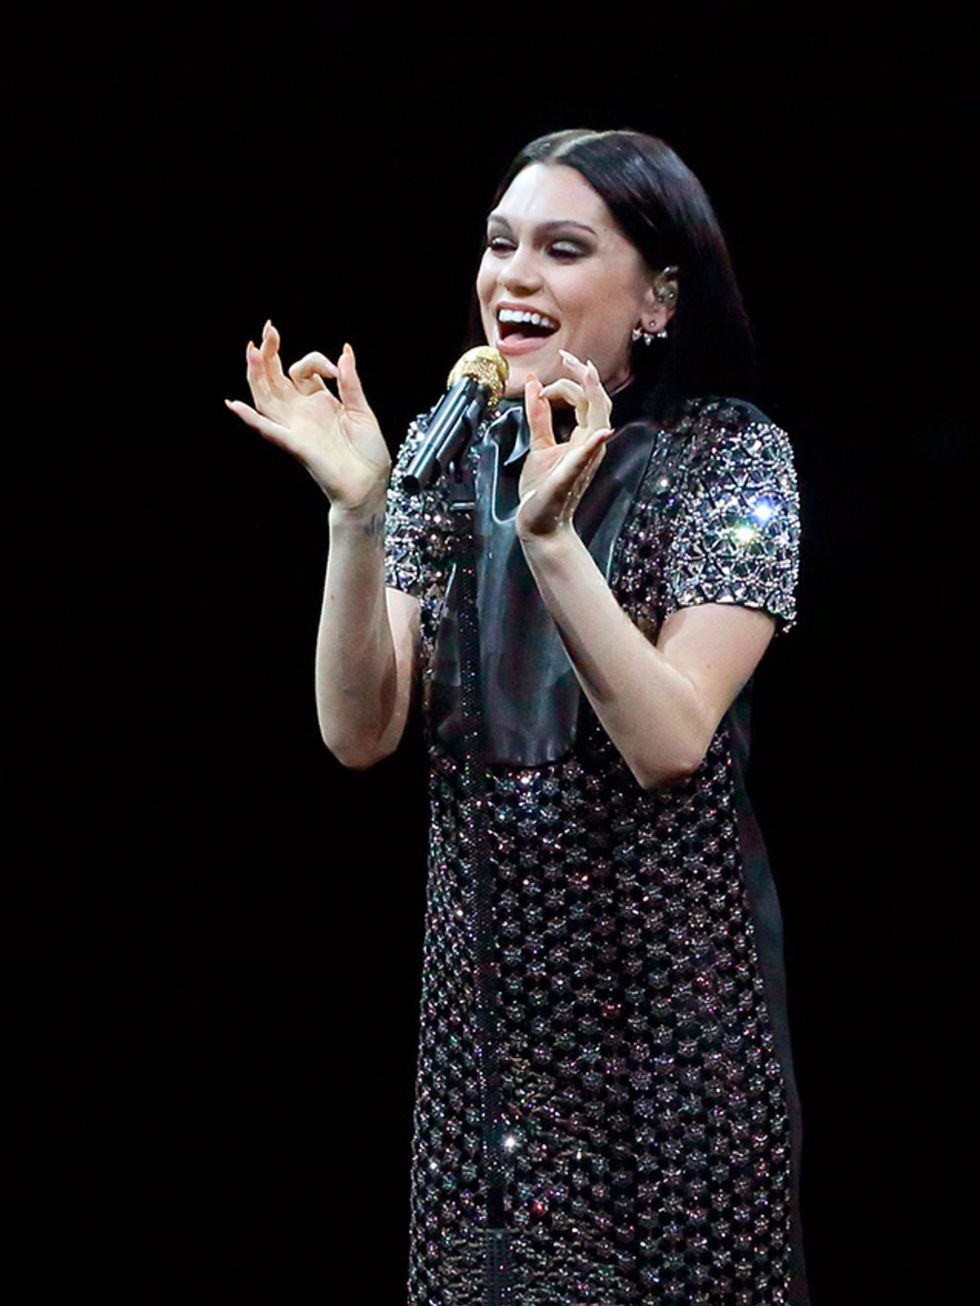 Jessie J performing in a Gucci dress at the The Gucci 50th anniversary in Japan celebration in Tokyo, October 2014.